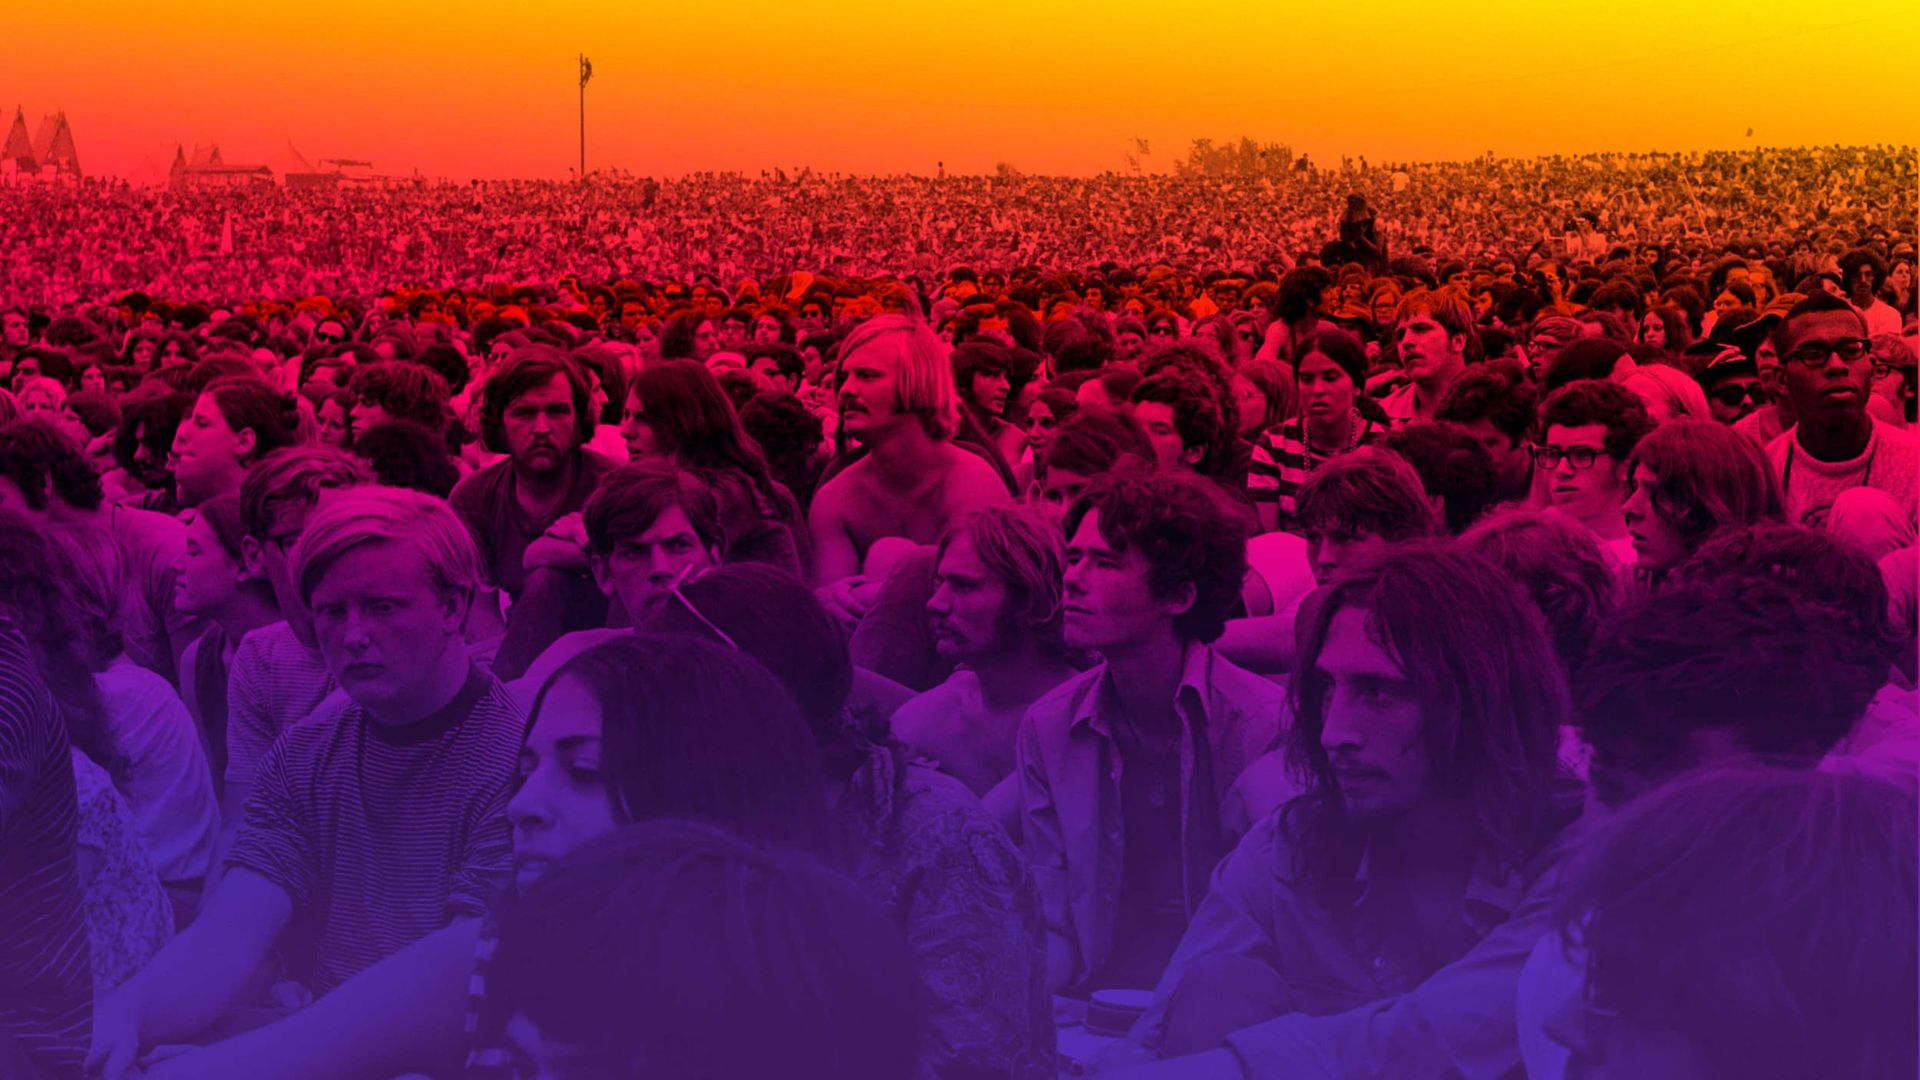 Woodstock: Three Days That Defined a Generation background